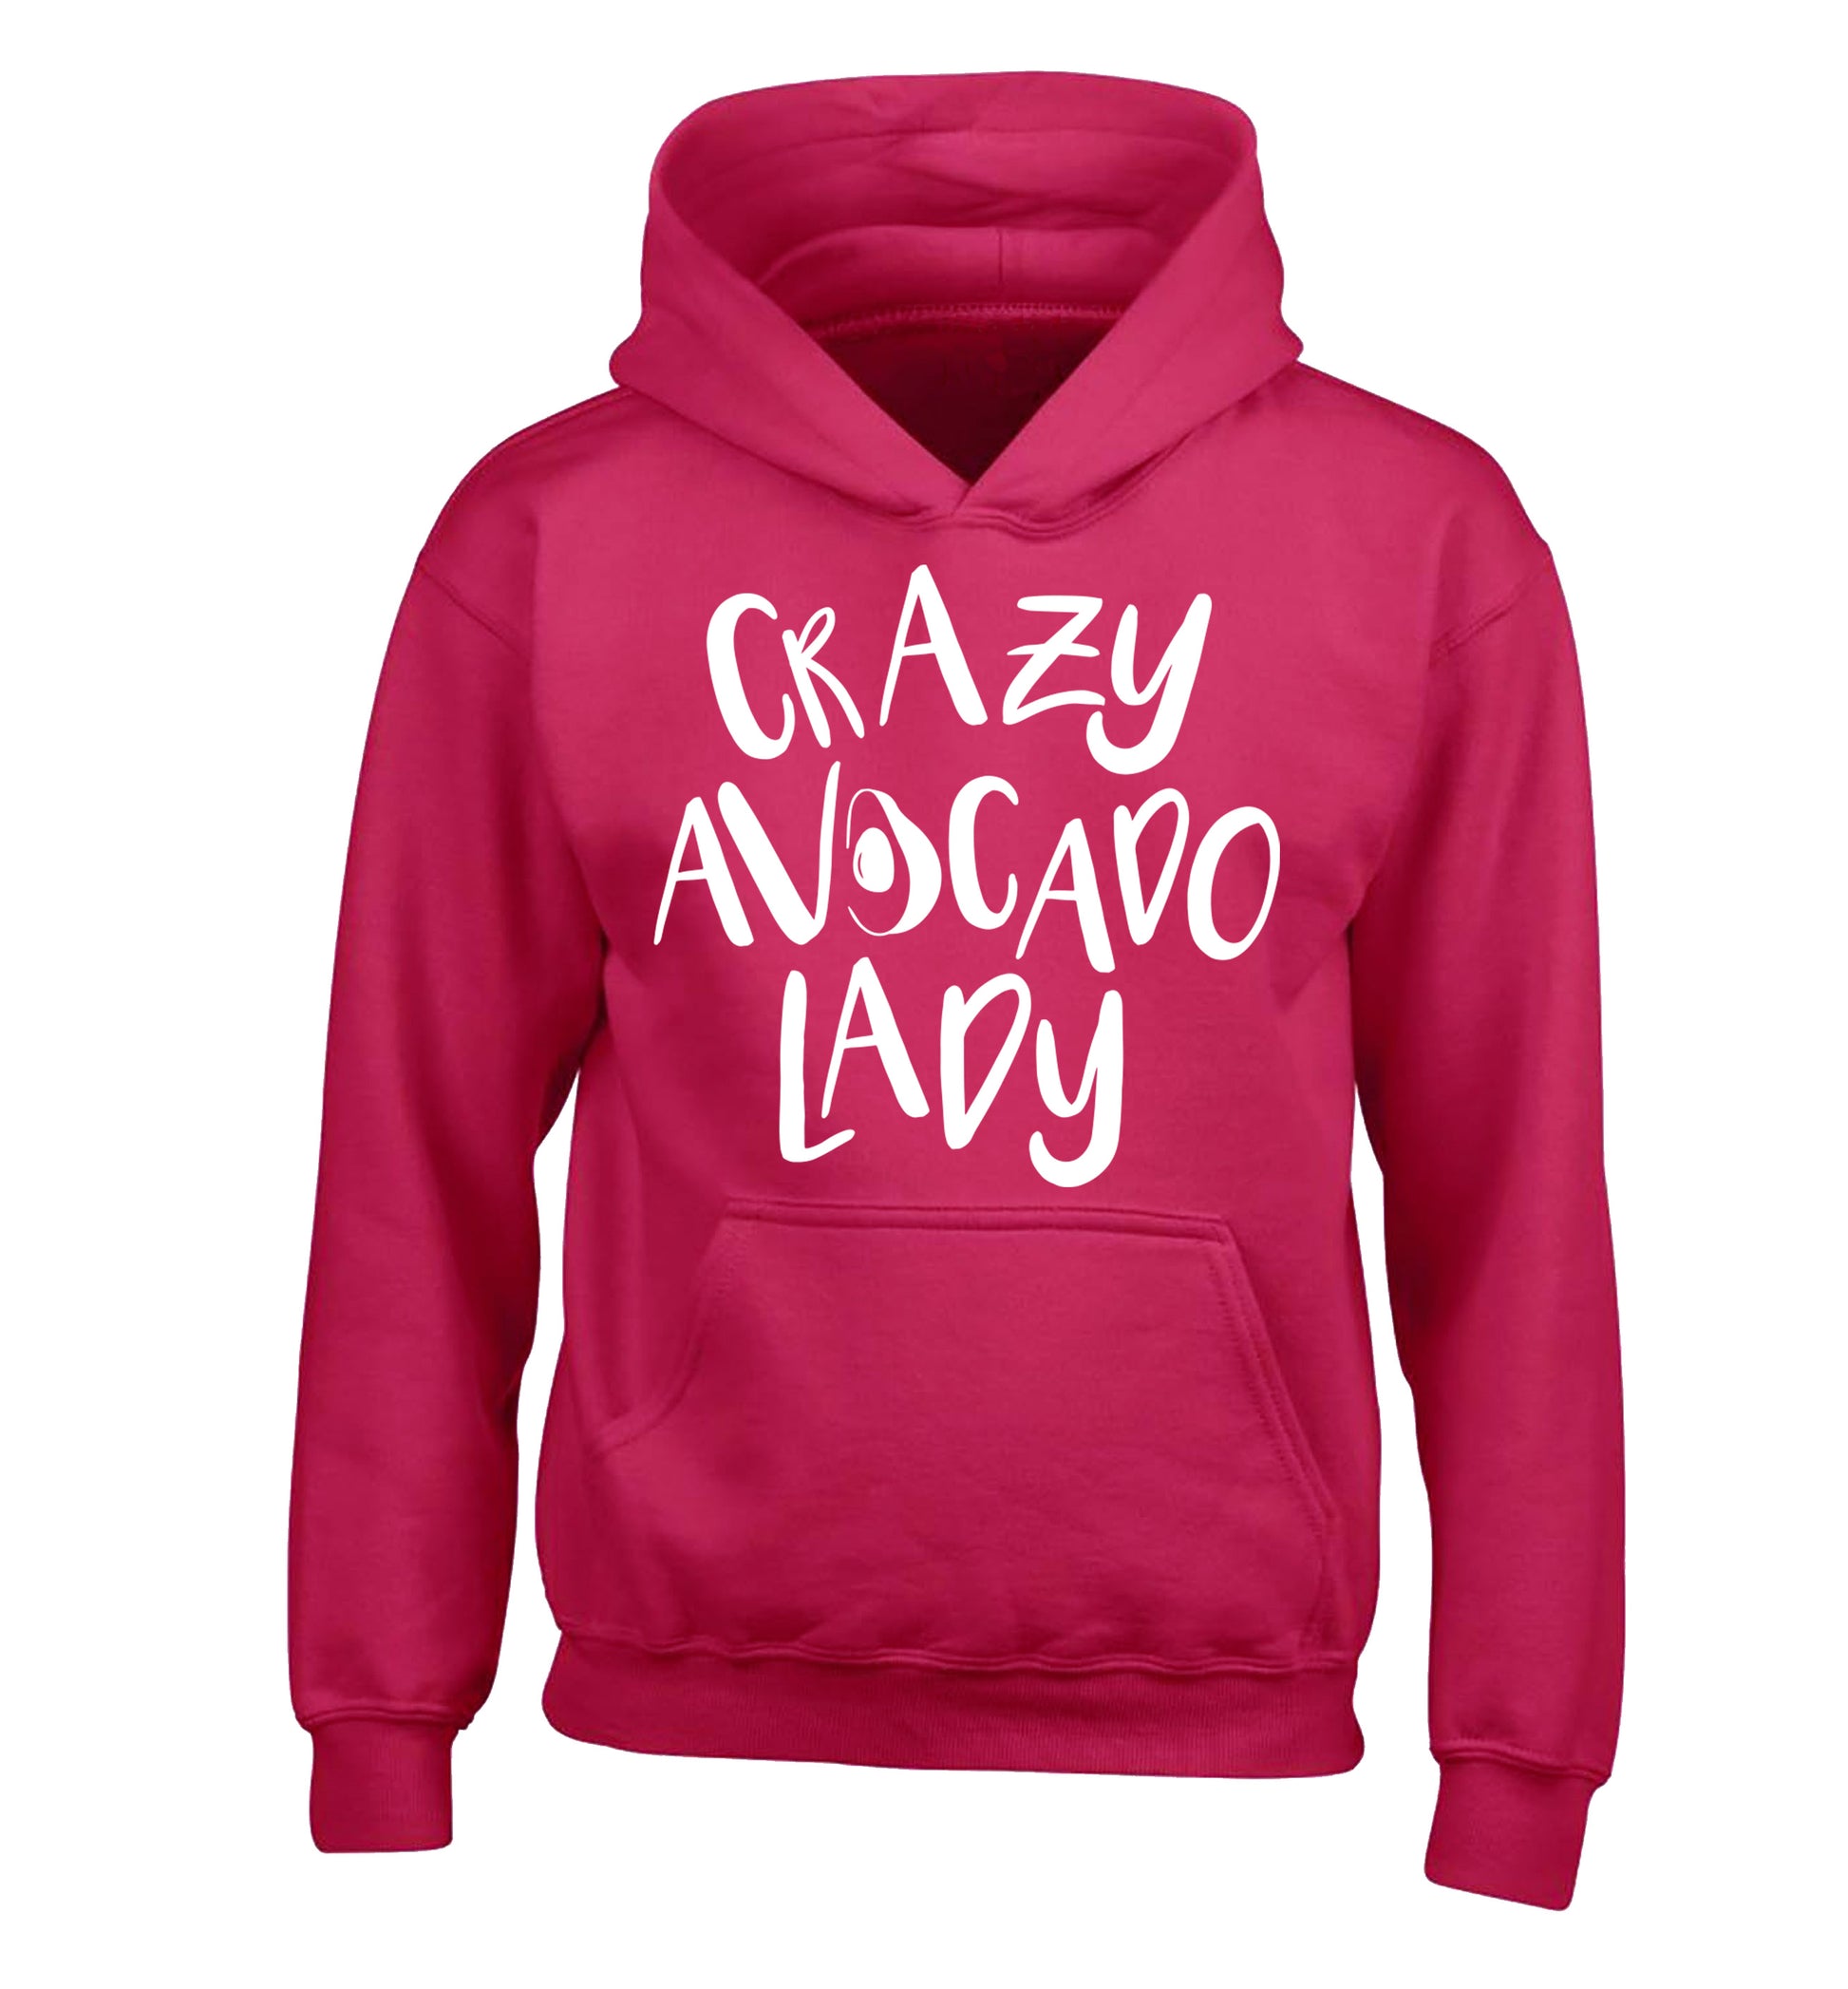 Crazy avocado lady children's pink hoodie 12-14 Years